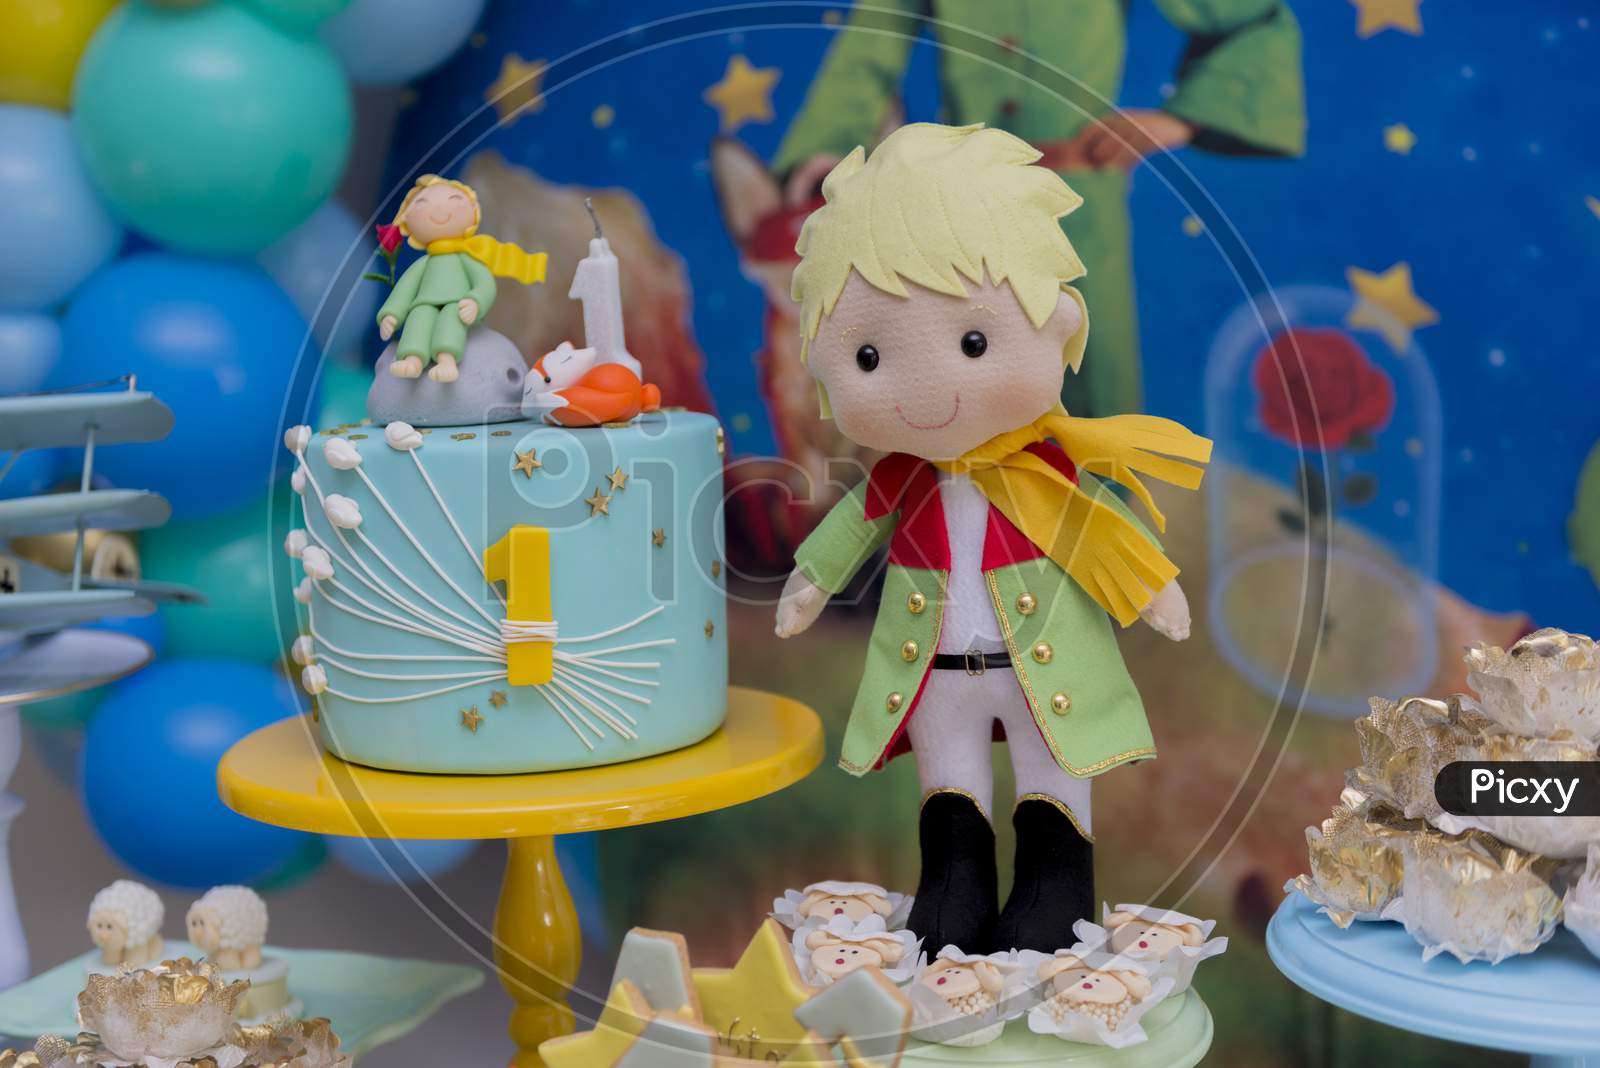 Party With The Theme Of The Little Prince.